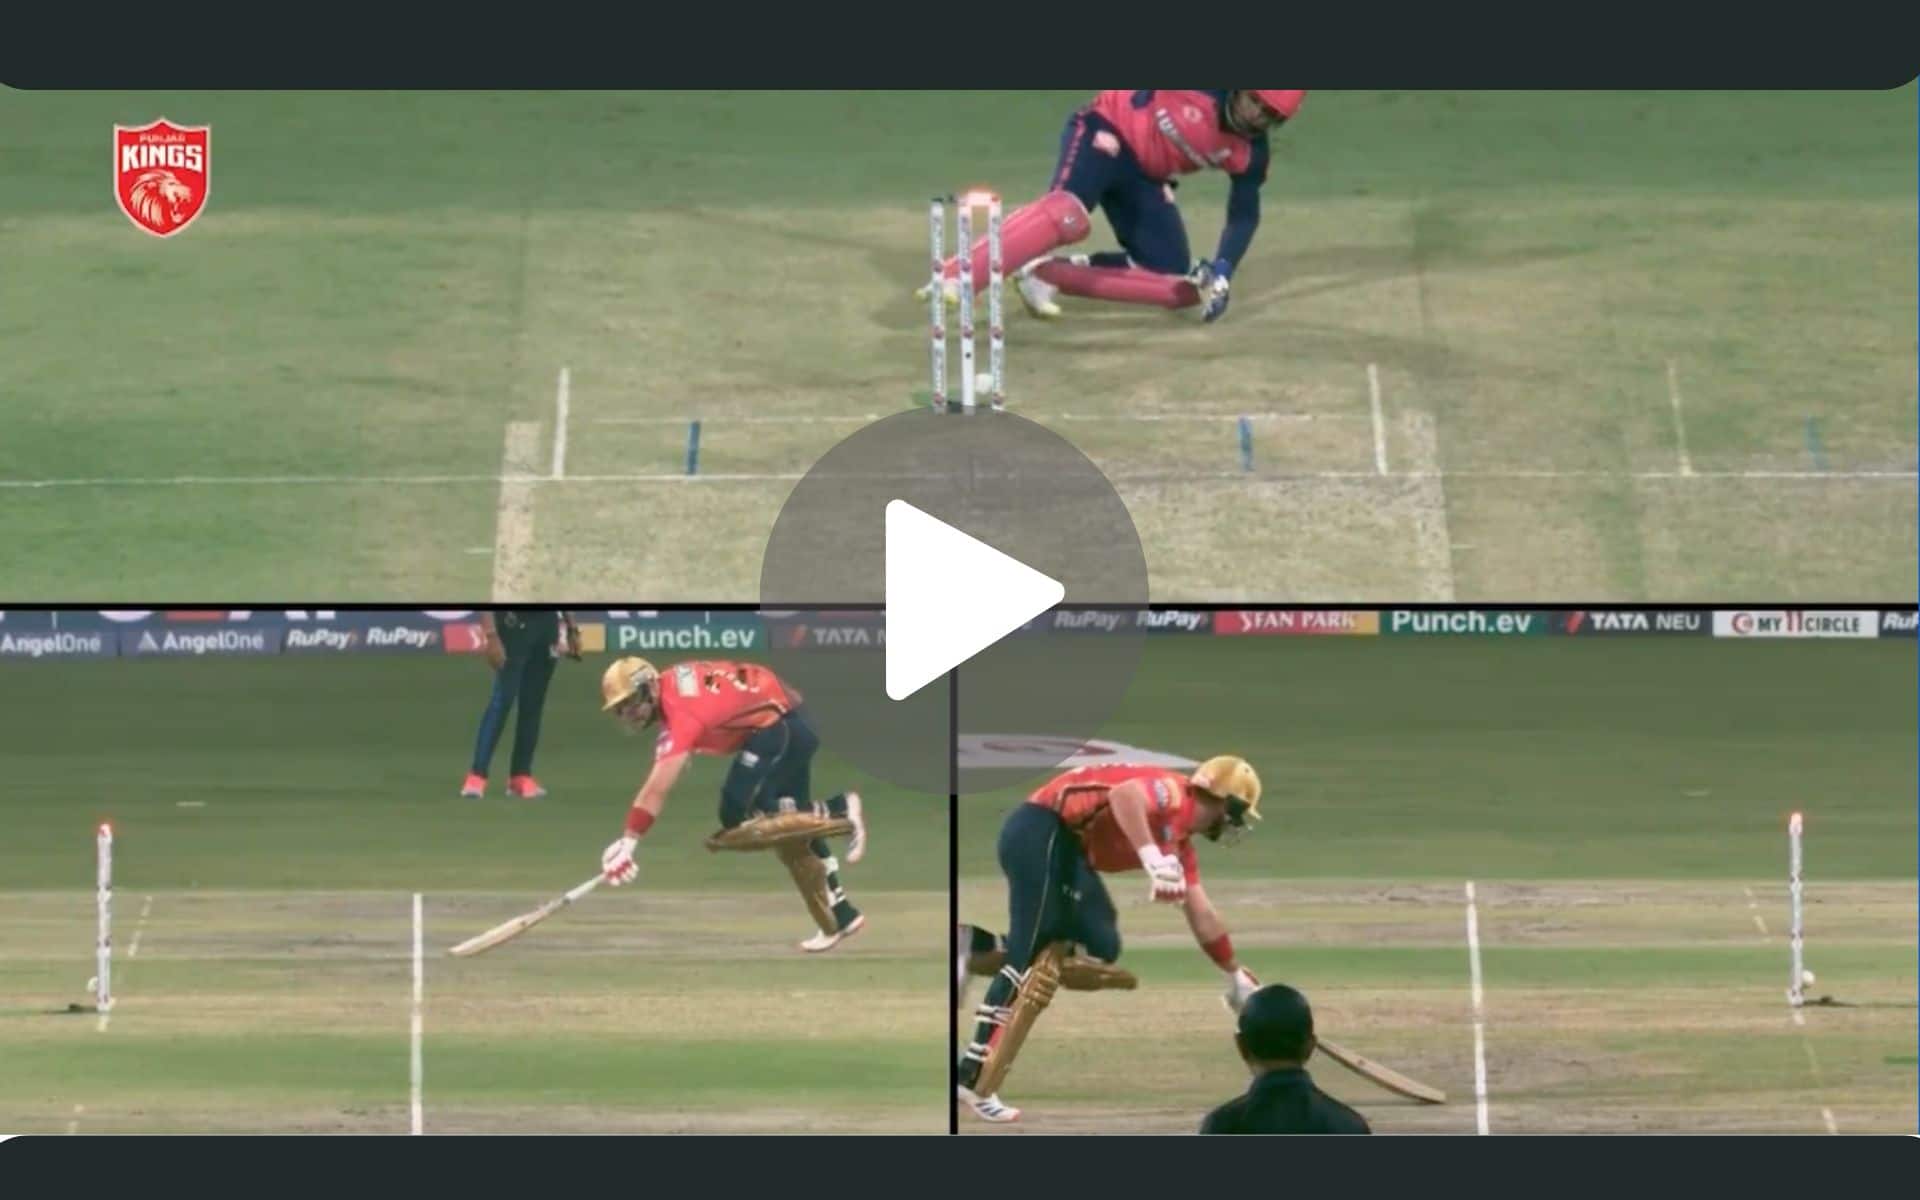 [Watch] Sanju Samson ‘Manufactures A Run-Out’ Like MS Dhoni To Outsmart Livingstone